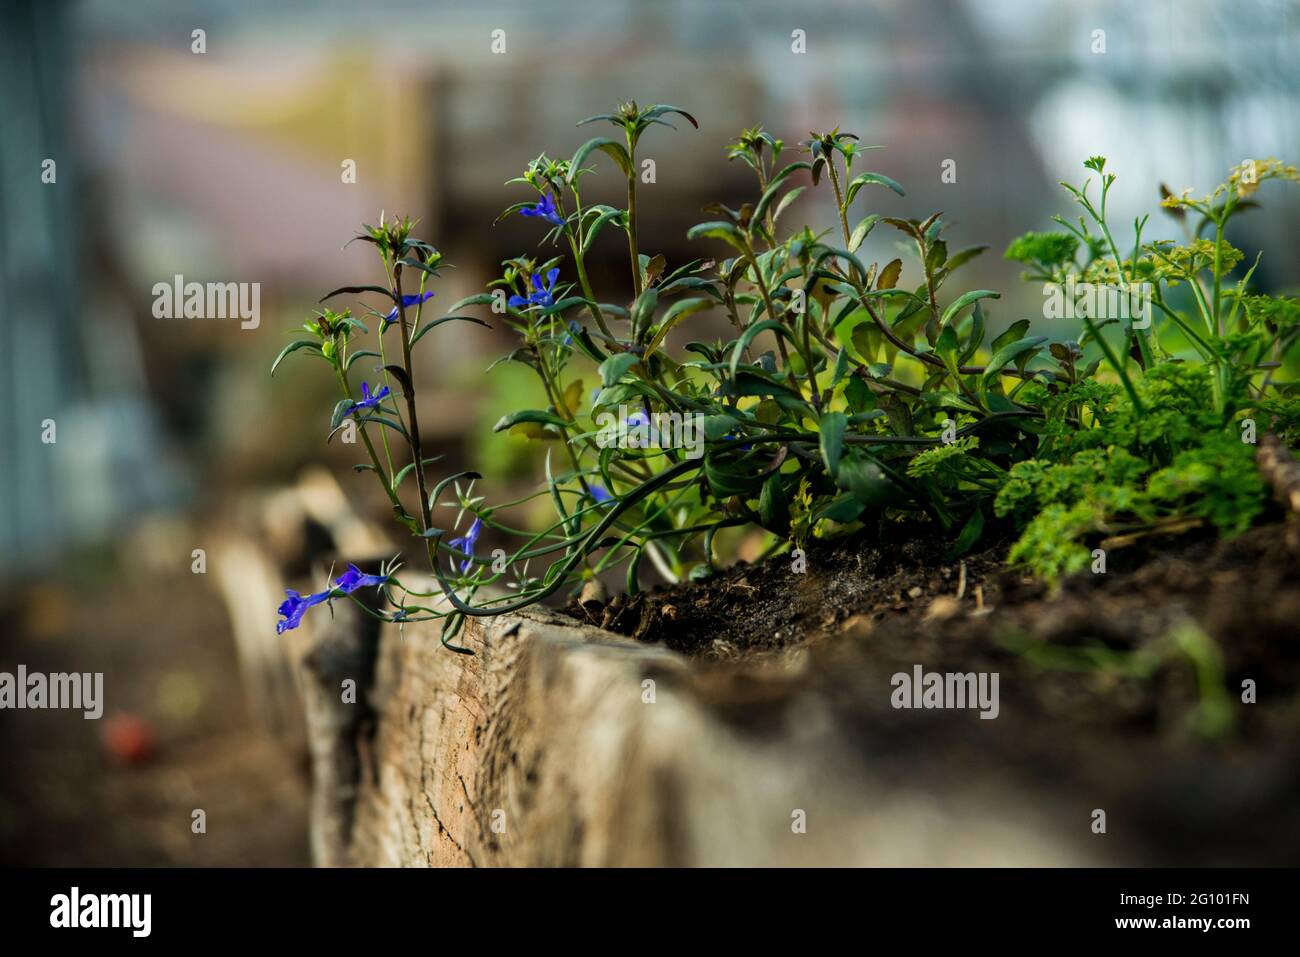 Summer gardening home specialty : a tiny and blue flower called Lobelia erinus. Woody flowerbed as a embellishment for a summertime garden. Stock Photo